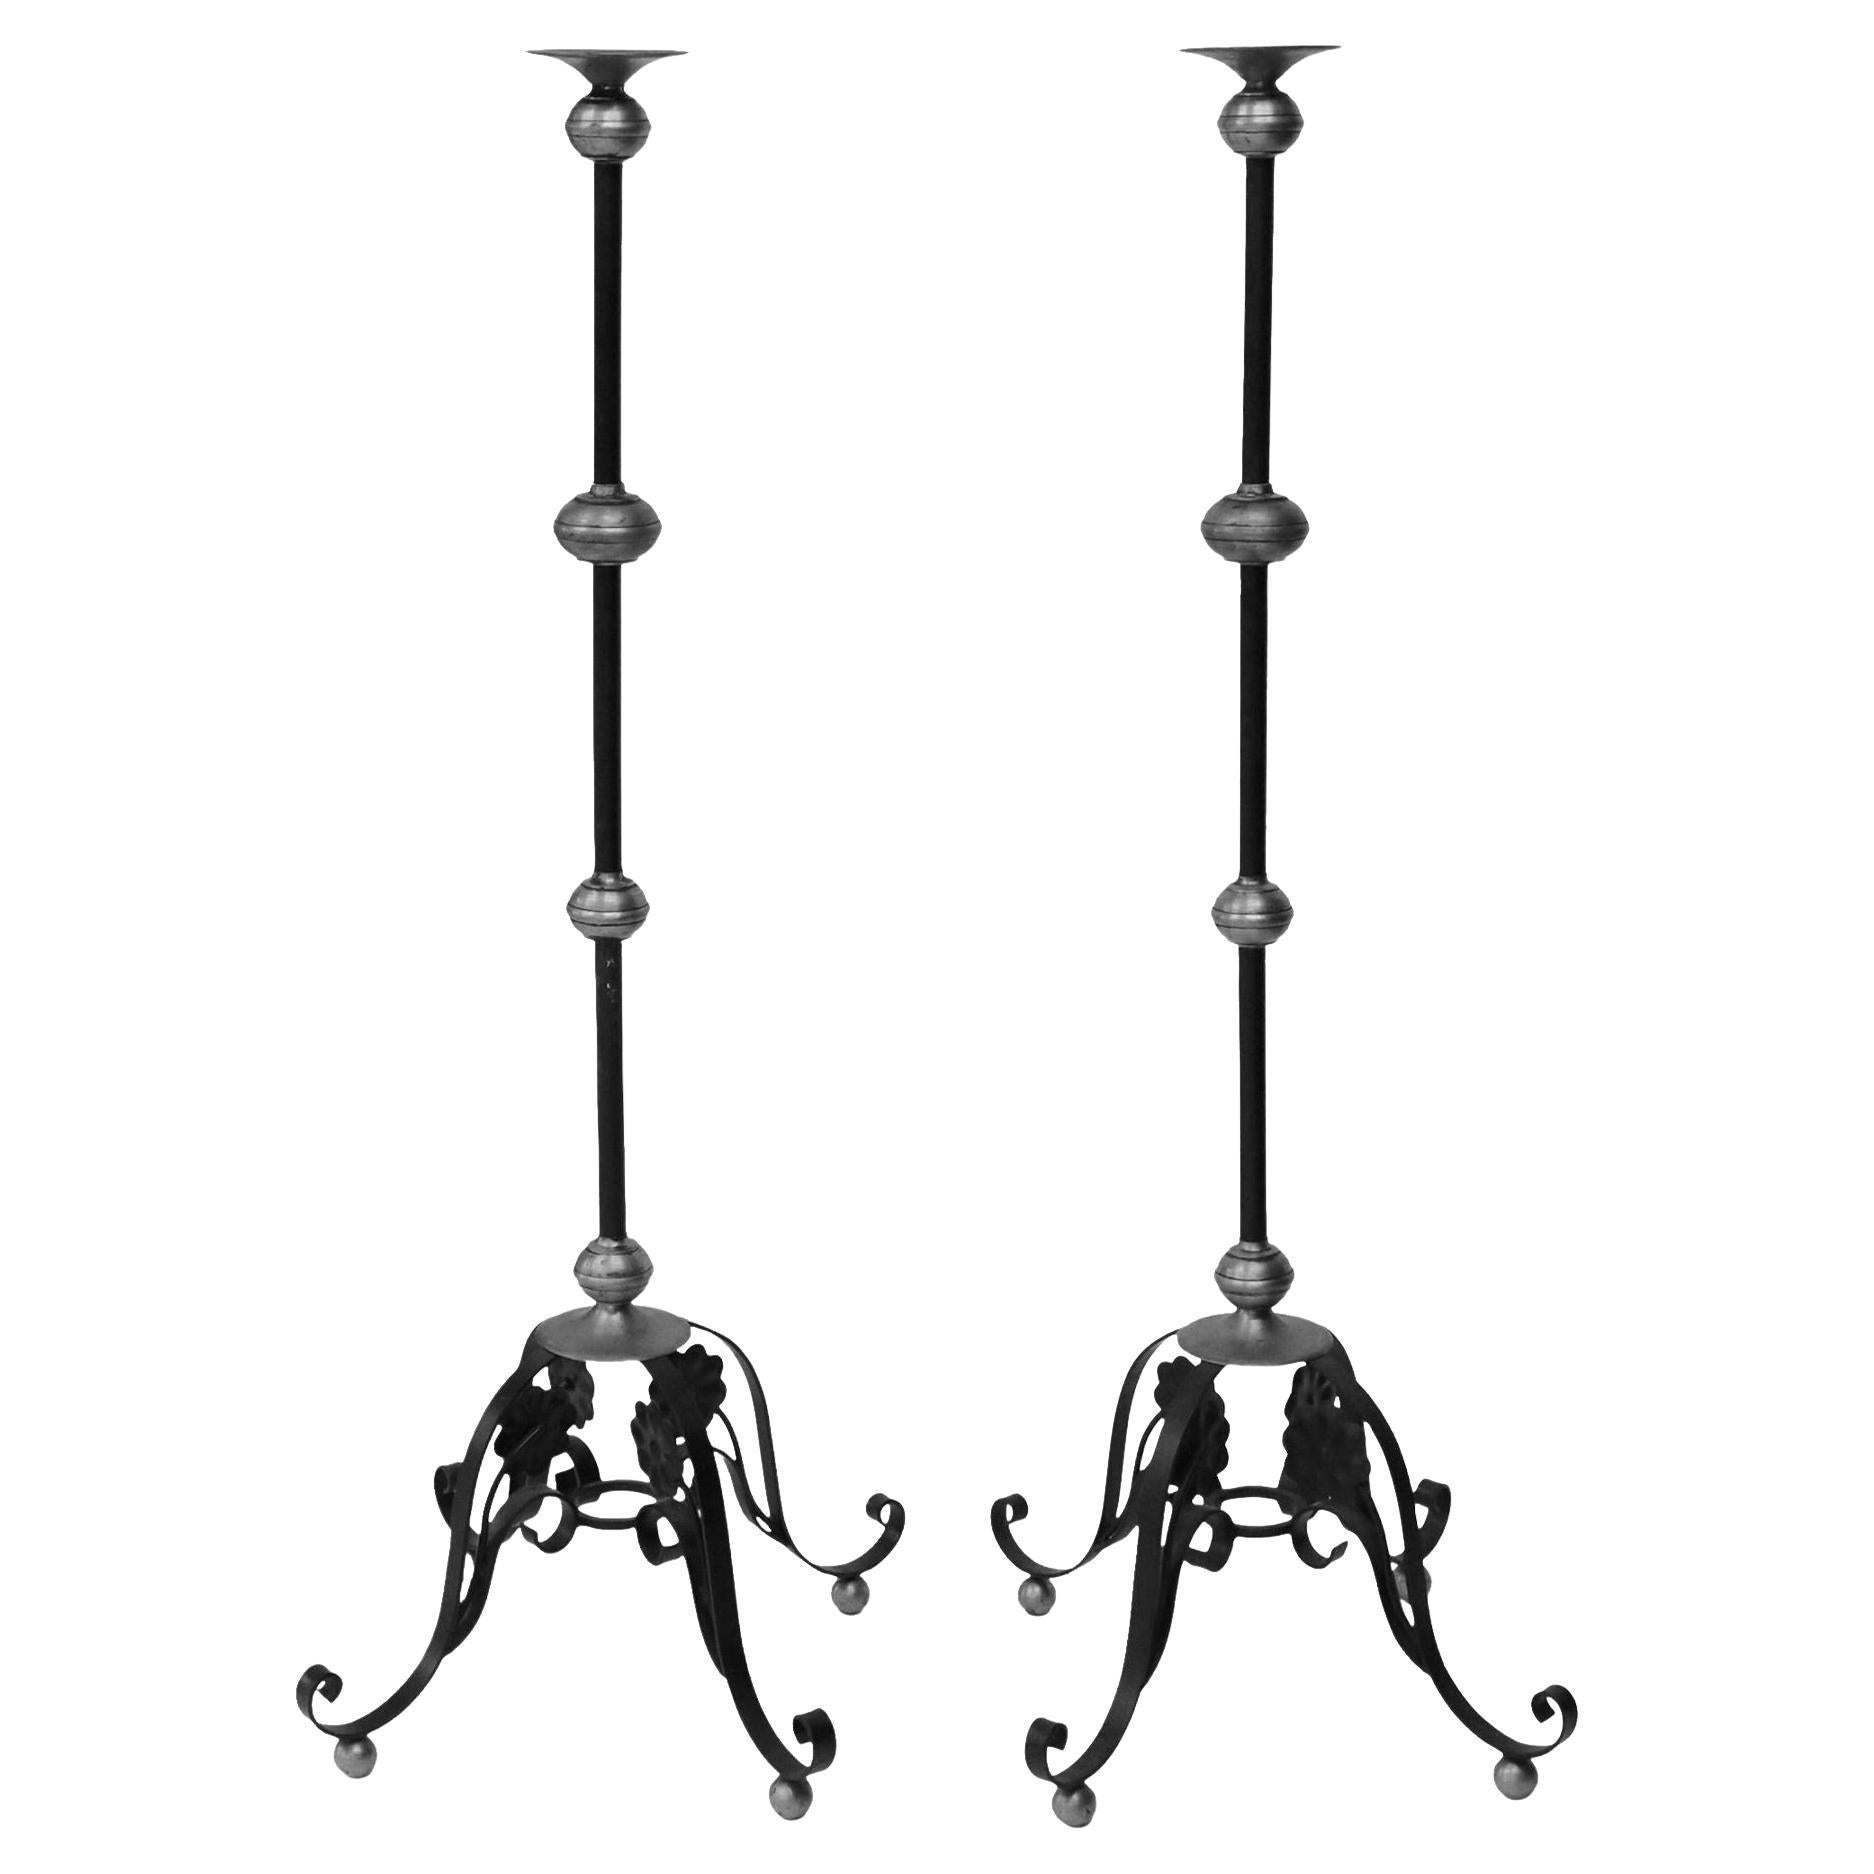 A pair of brass and wrought iron Church Torchères candle floor stands, 20th c. The candle stands each feature a brass bobeche, iron stand, rising on scroll legs with flower heads, ending in ball feet. 

Dimensions
approx 58.75